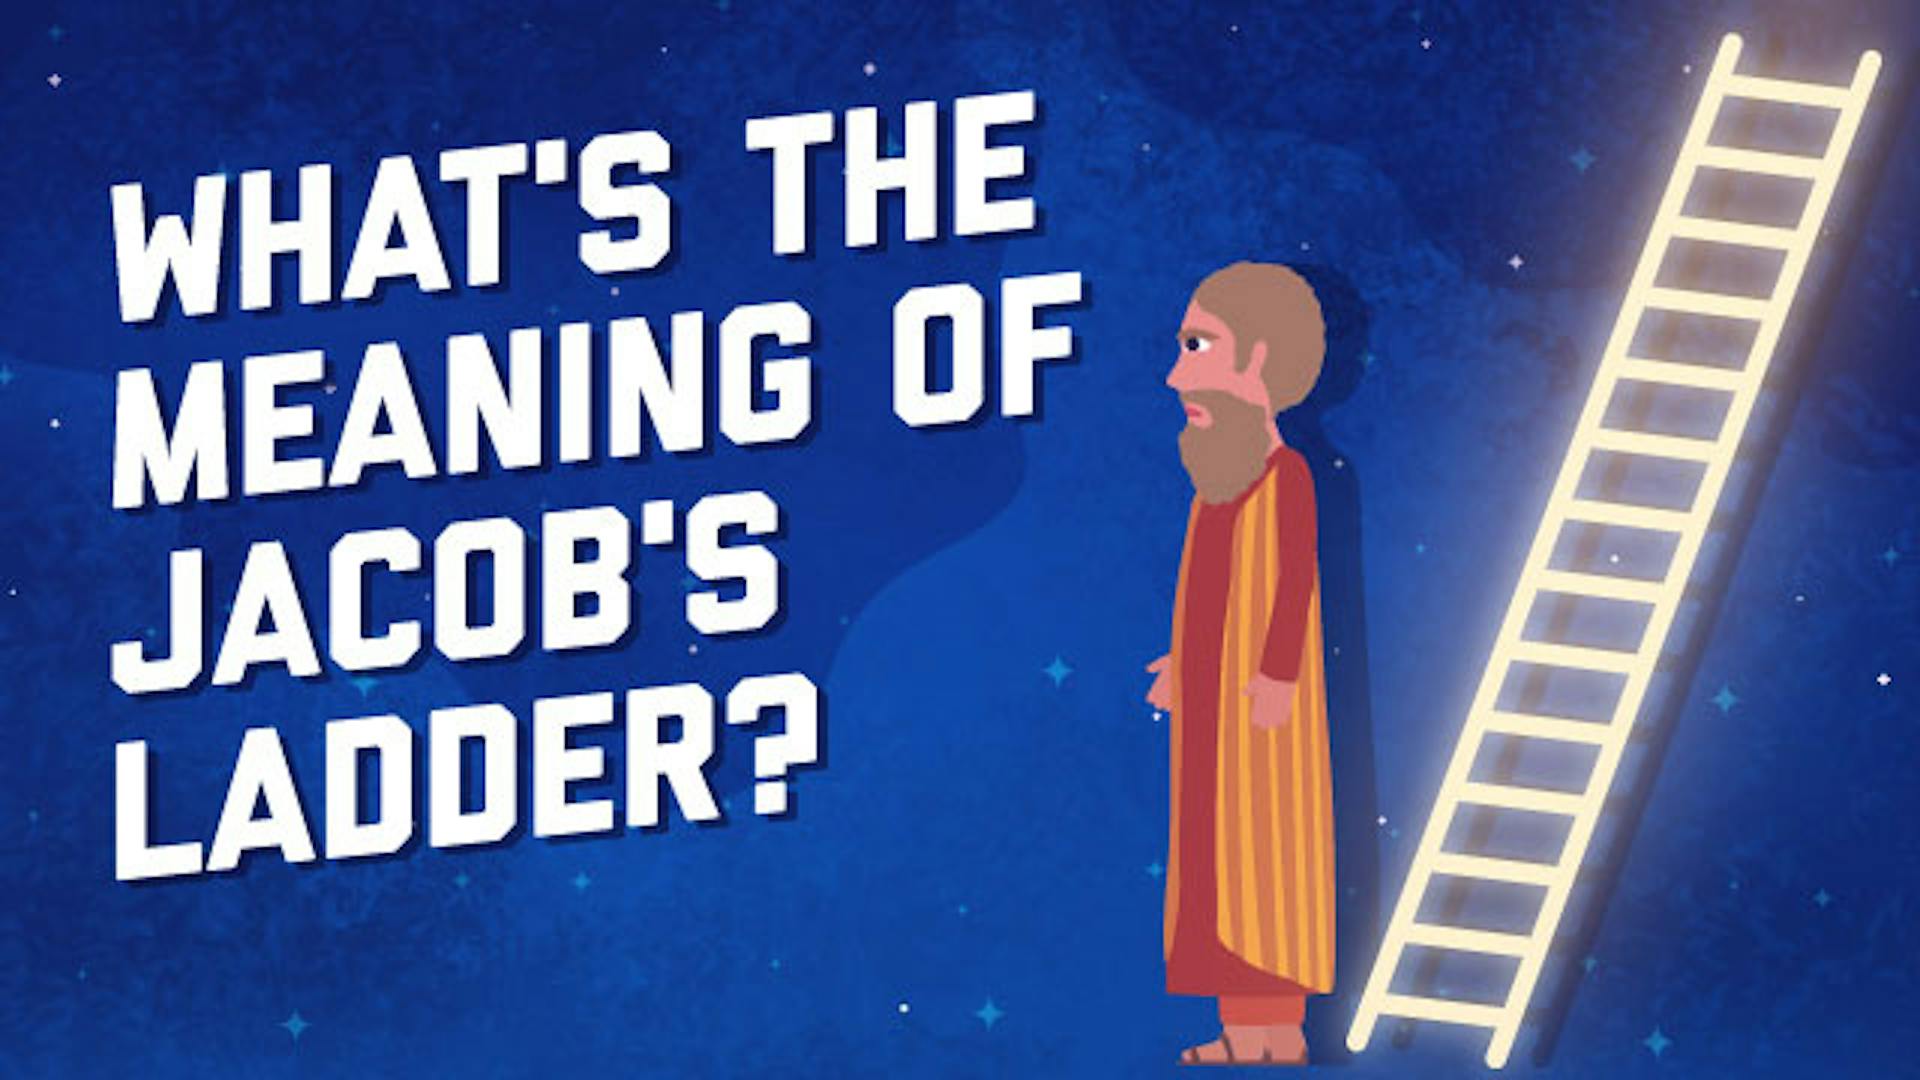 Jacob's ladder meaning